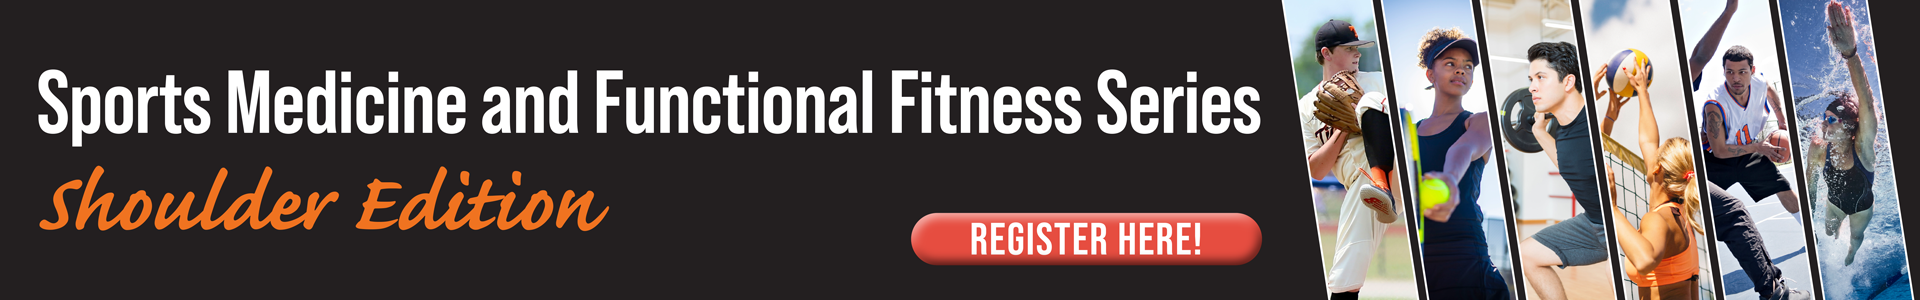 Sports Medicine and Functional Fitness Series: Shoulder Edition